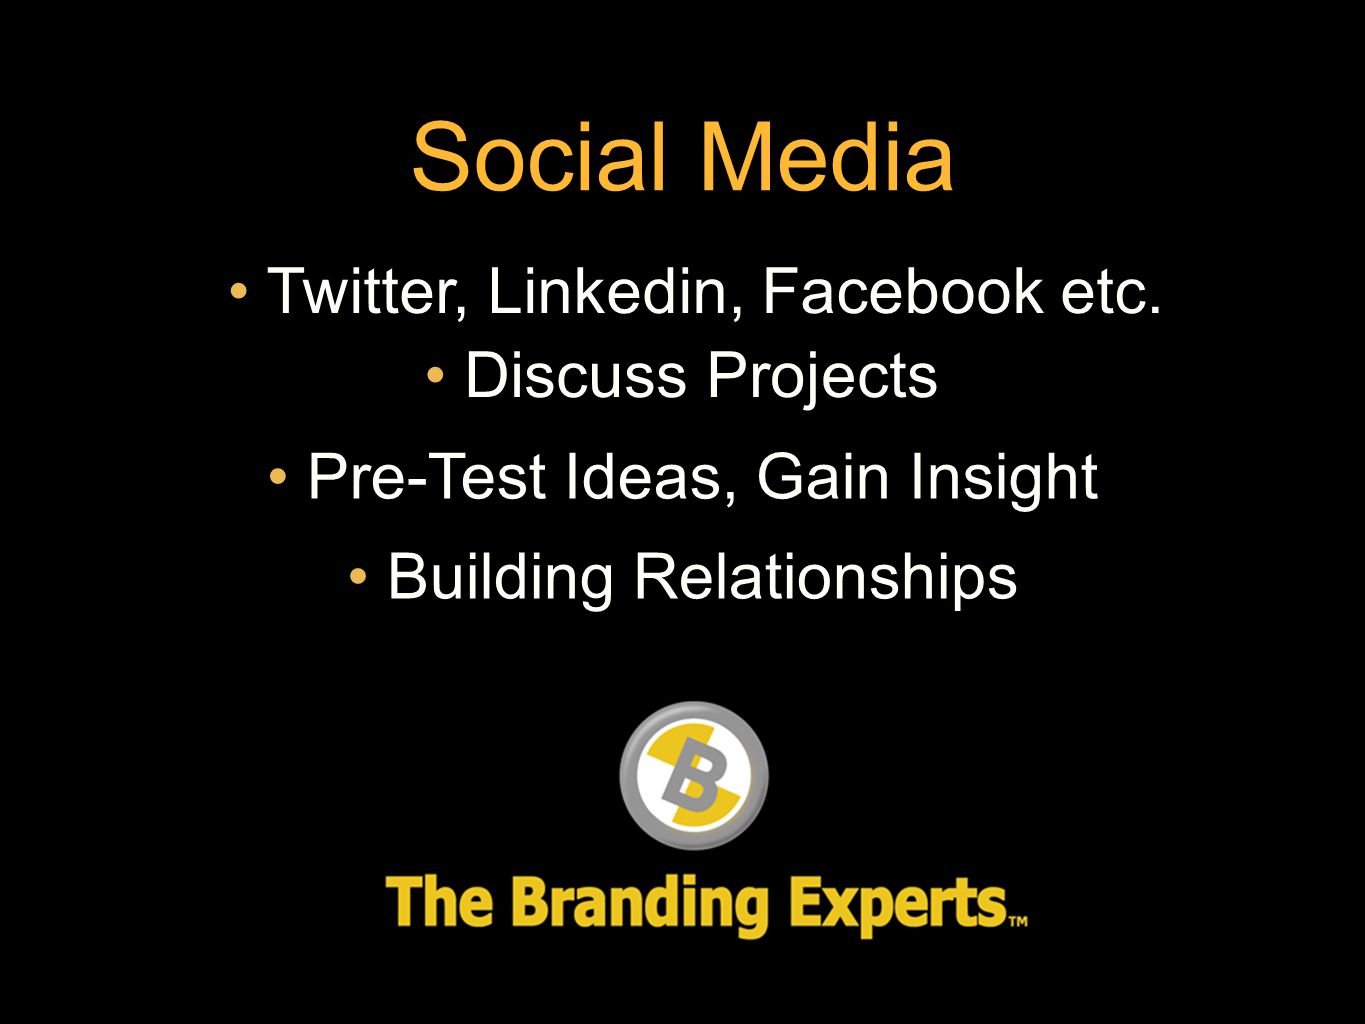 Social Media Building Relationships Discuss Projects Pre-Test Ideas, Gain Insight Twitter, Linkedin, Facebook etc.